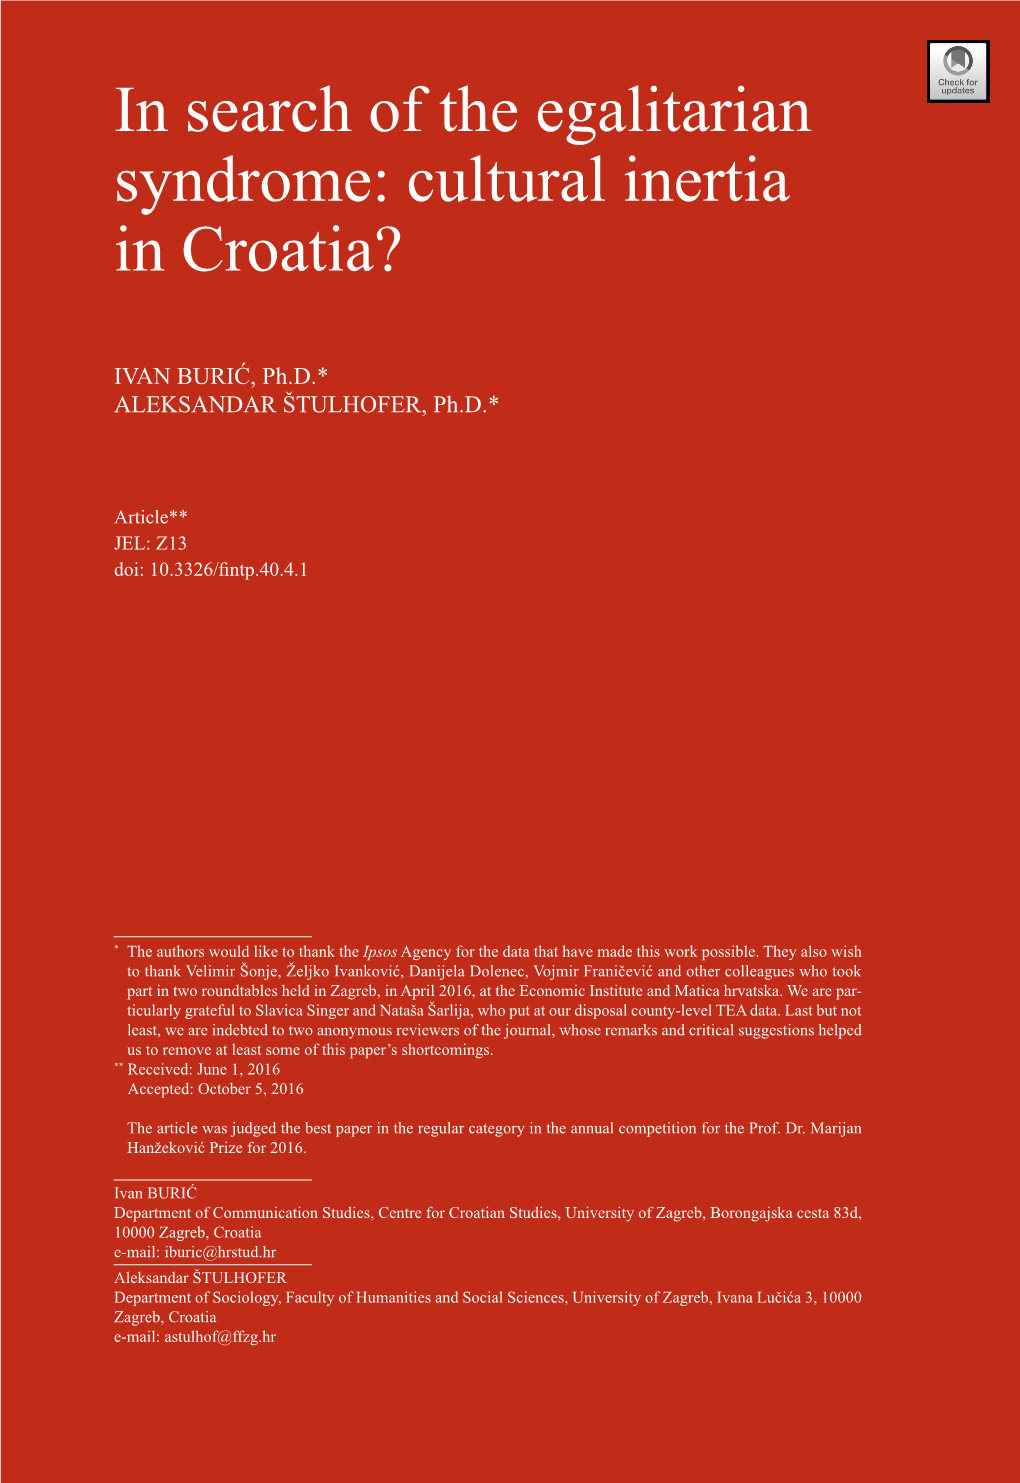 In Search of the Egalitarian Syndrome: Cultural Inertia in Croatia?